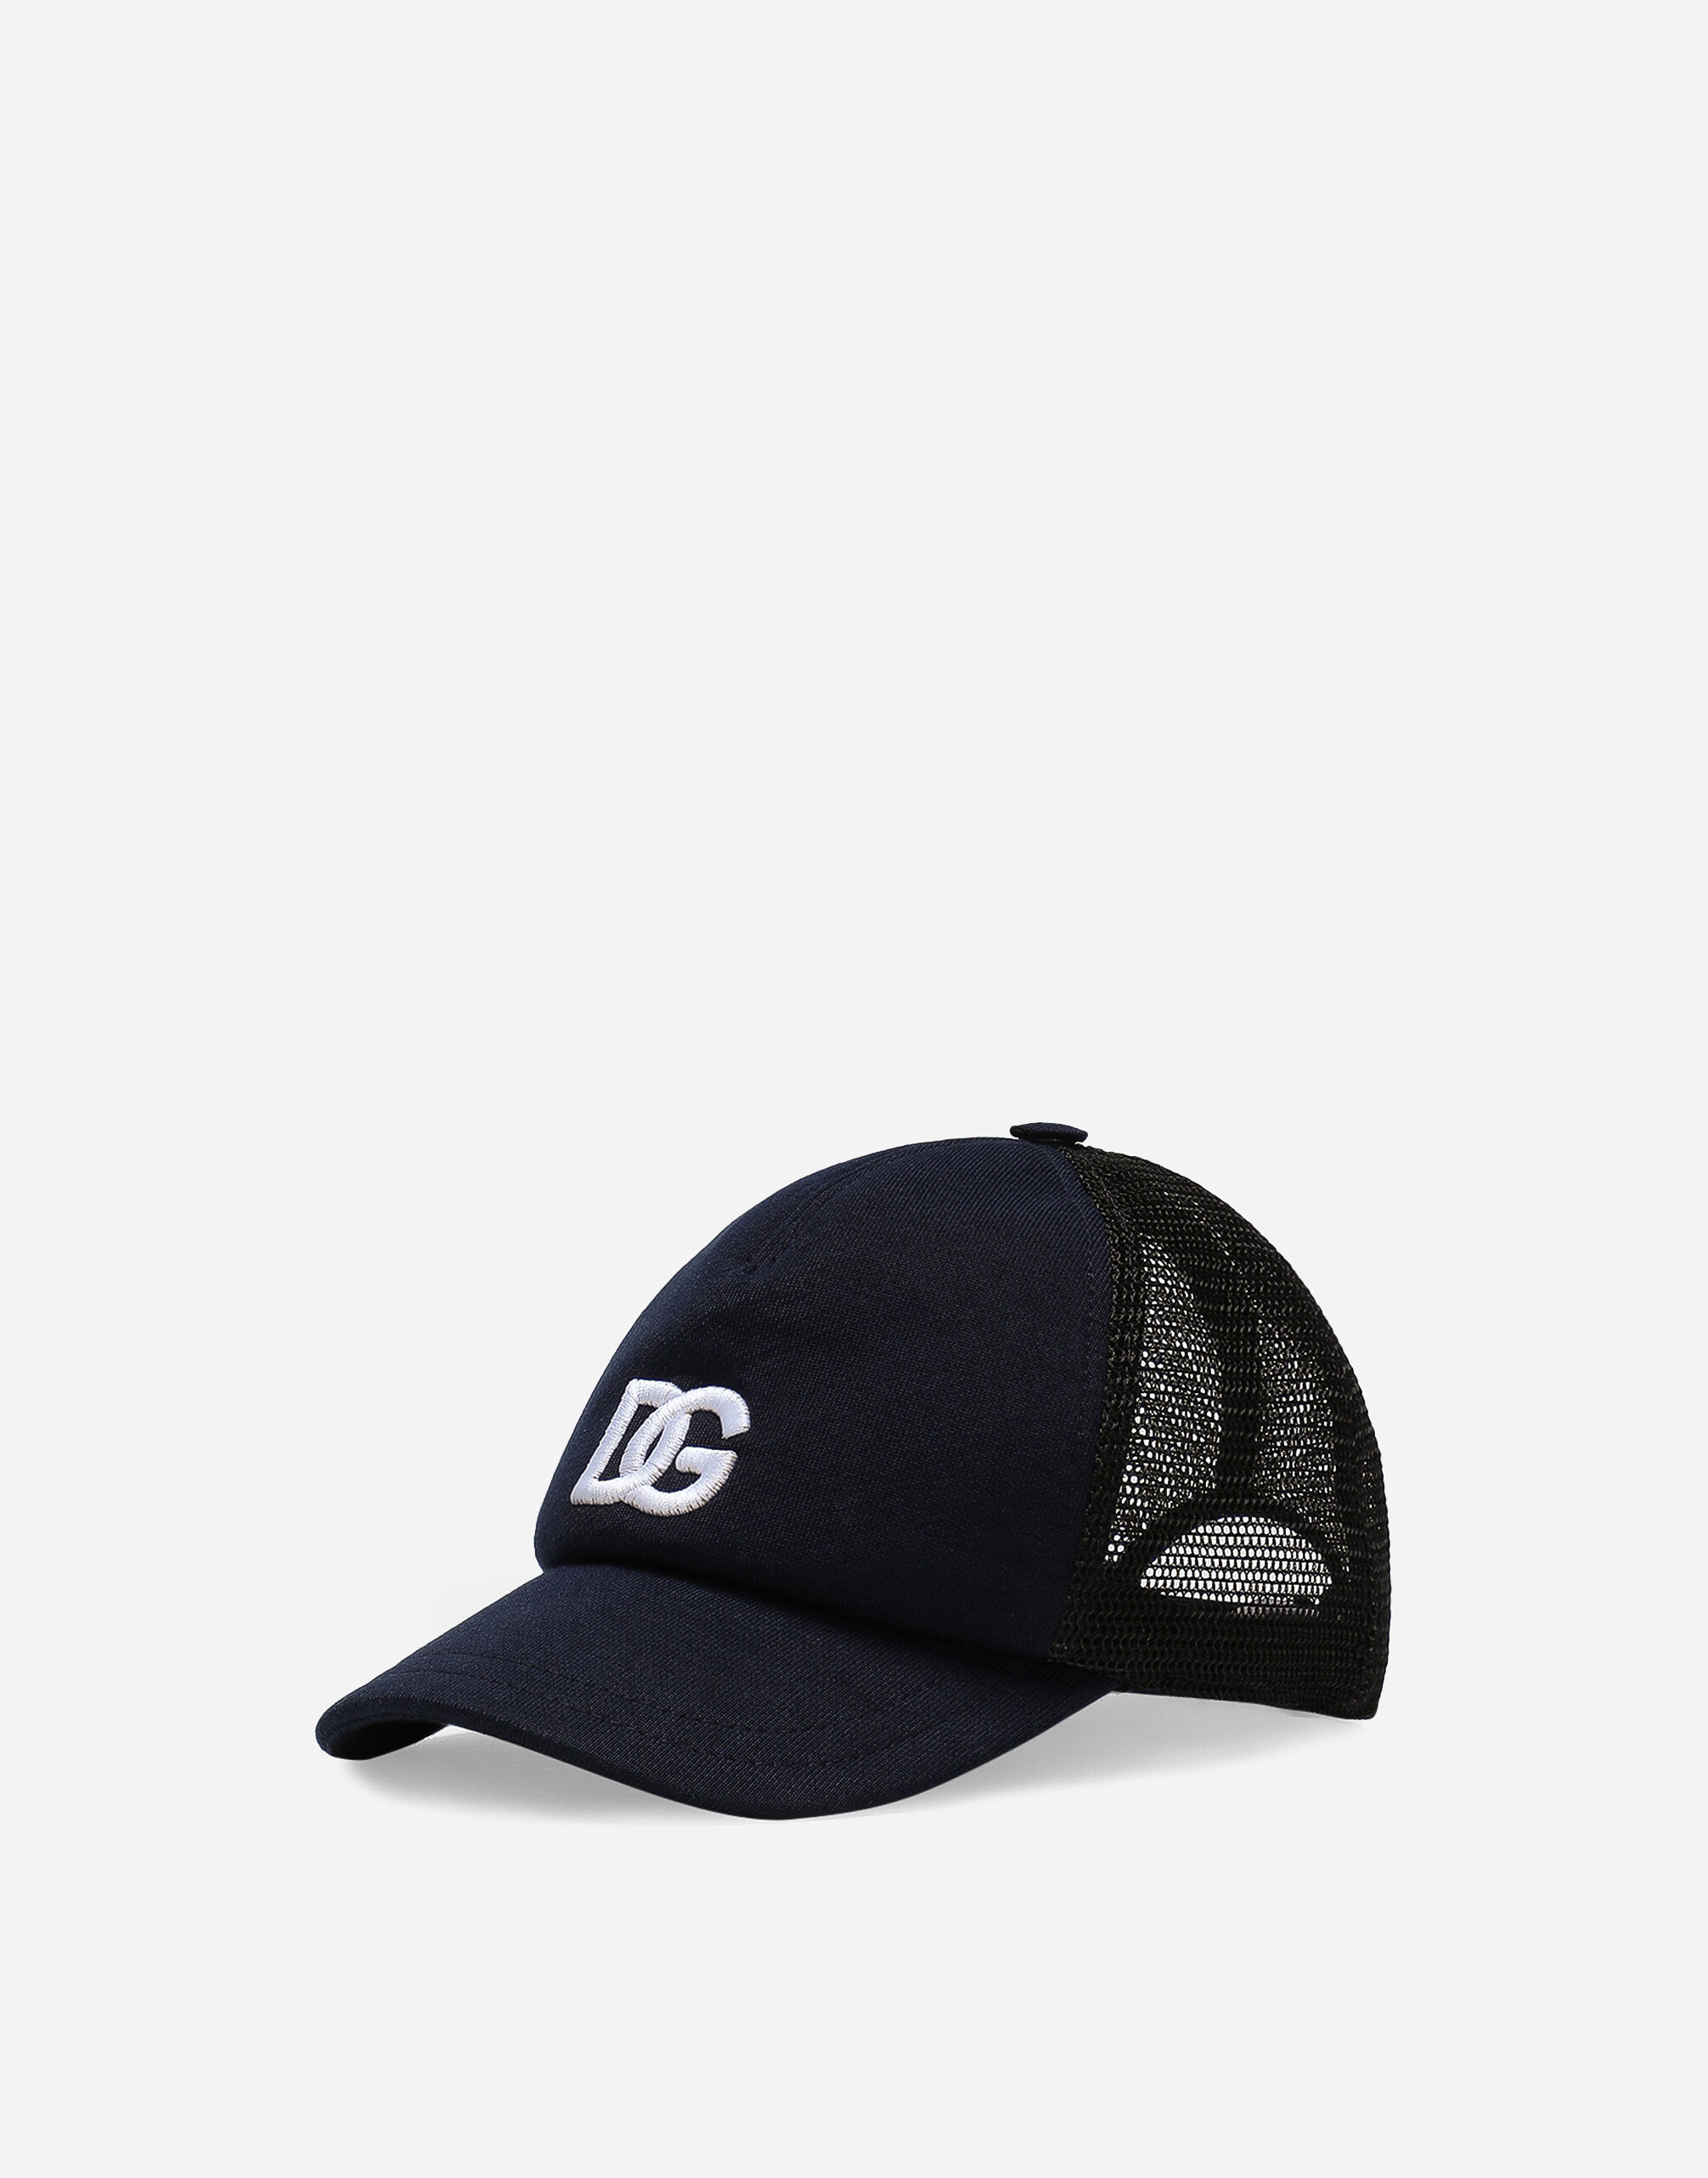 ${brand} Cotton and mesh hat with peak and DG logo ${colorDescription} ${masterID}